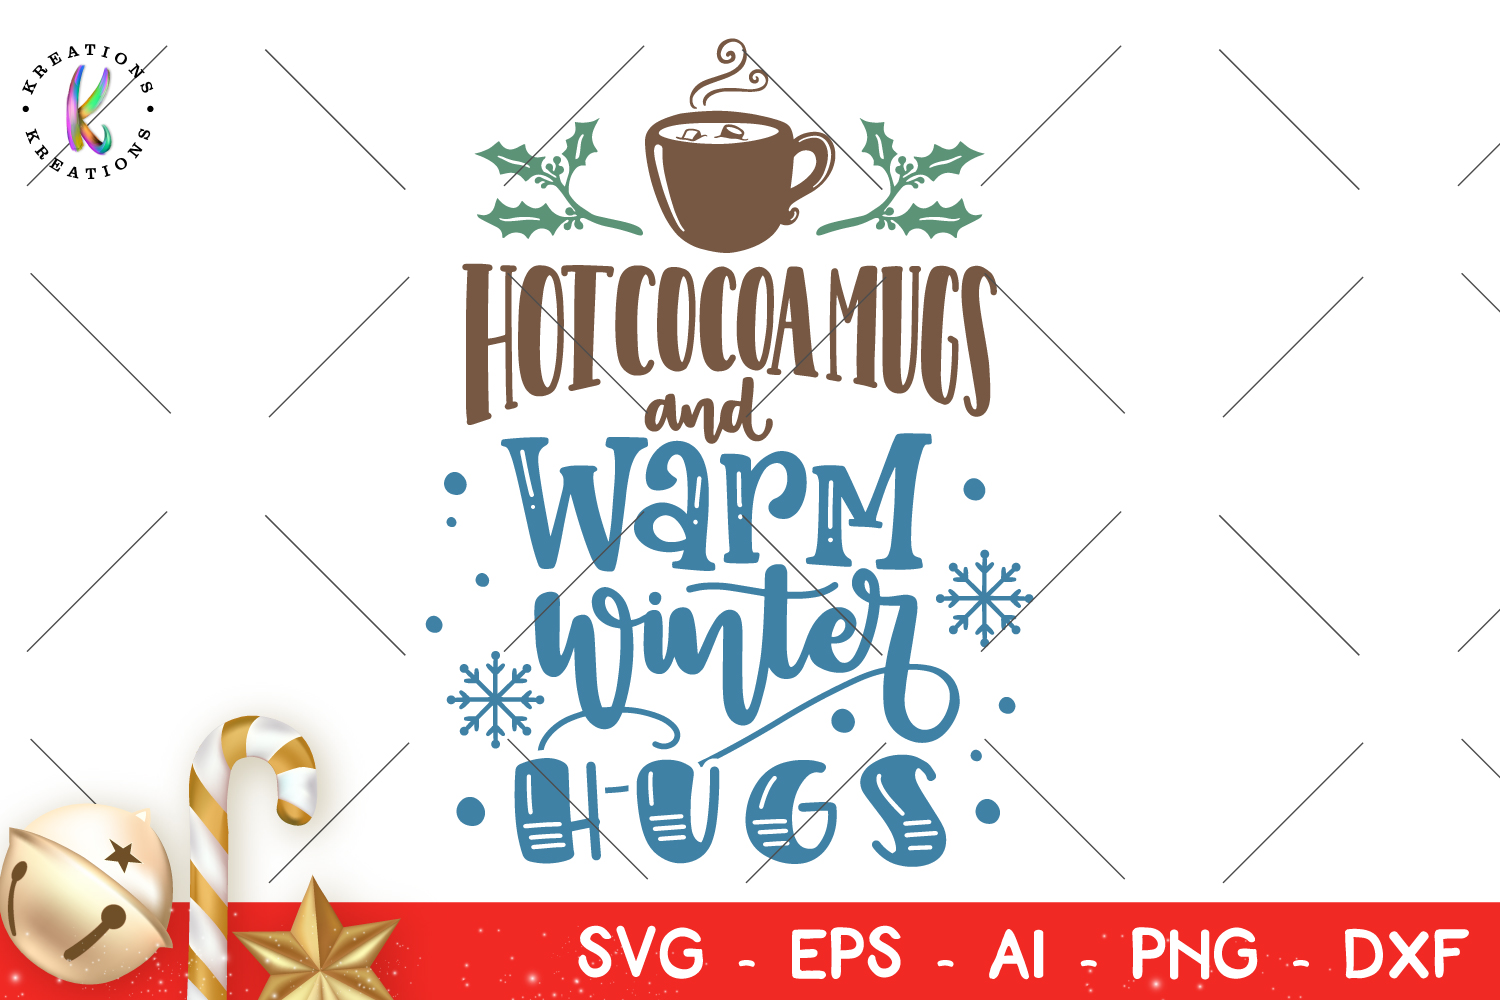 Hot Cocoa Mugs and Warm Winter Hugs svg Christmas quote example image 1.